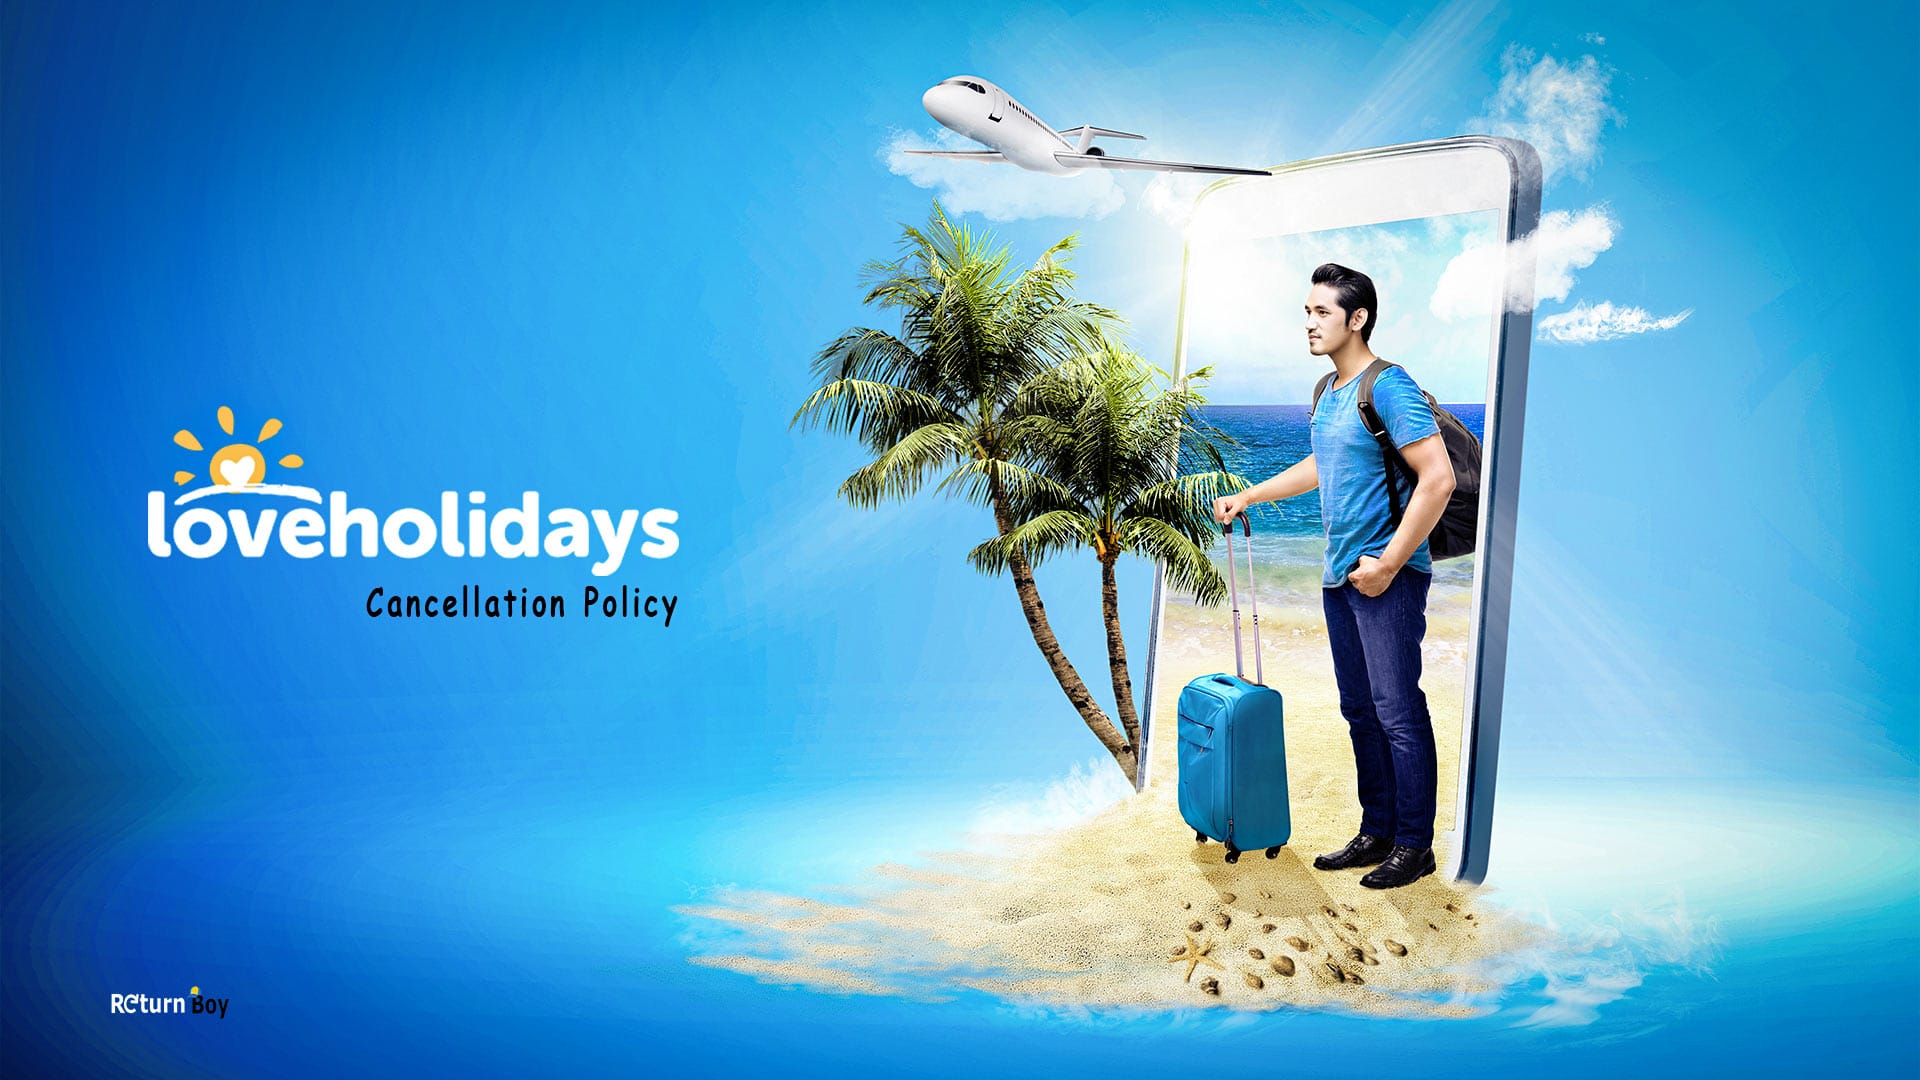 Loveholidays Cancellation Policy